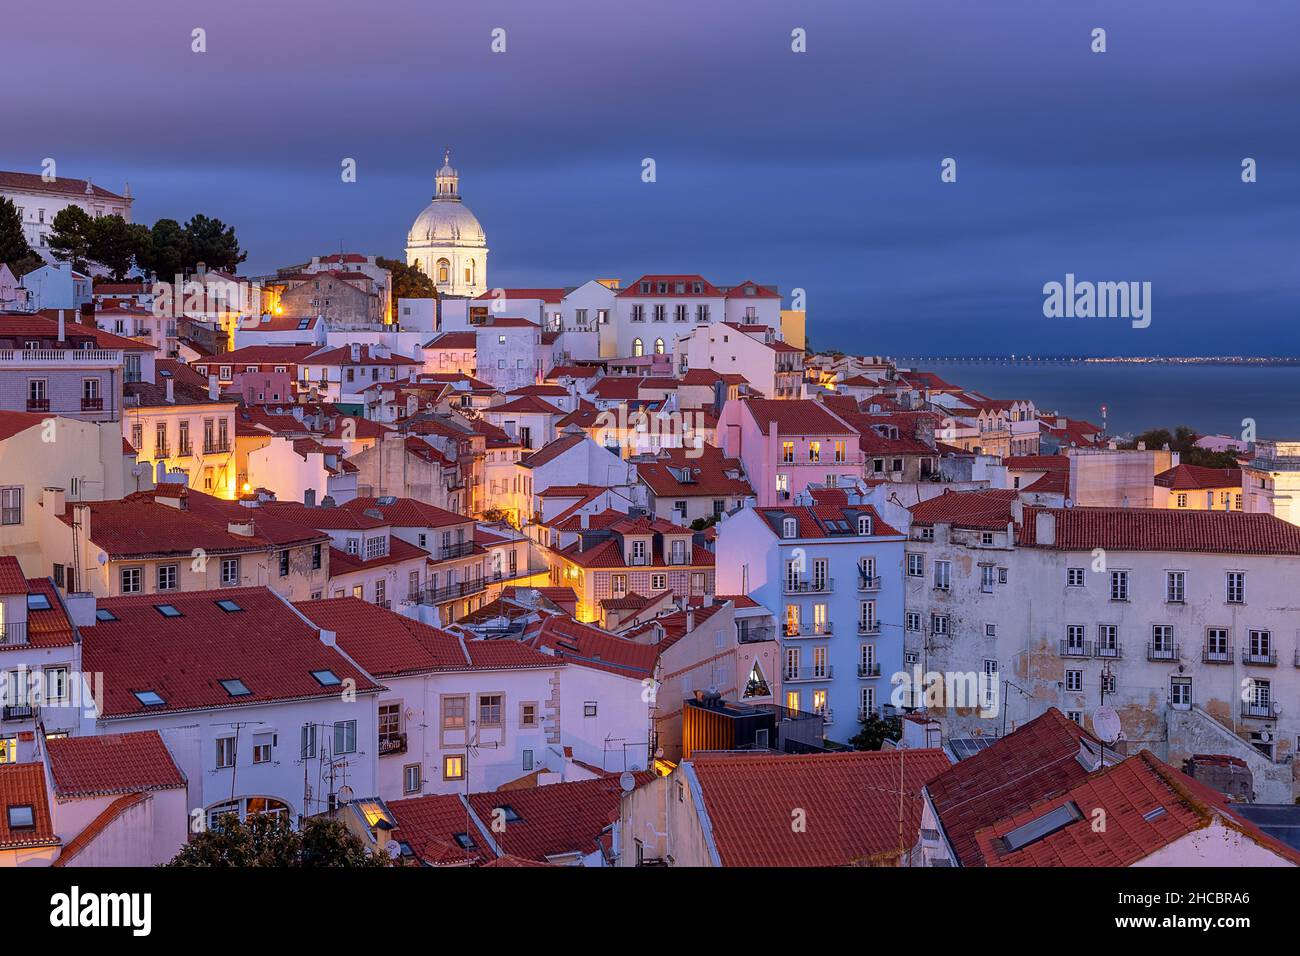 Lisbon is the beautiful capital of Portugal. Here we see the old alfama district from a popular viewpoint. Stock Photo